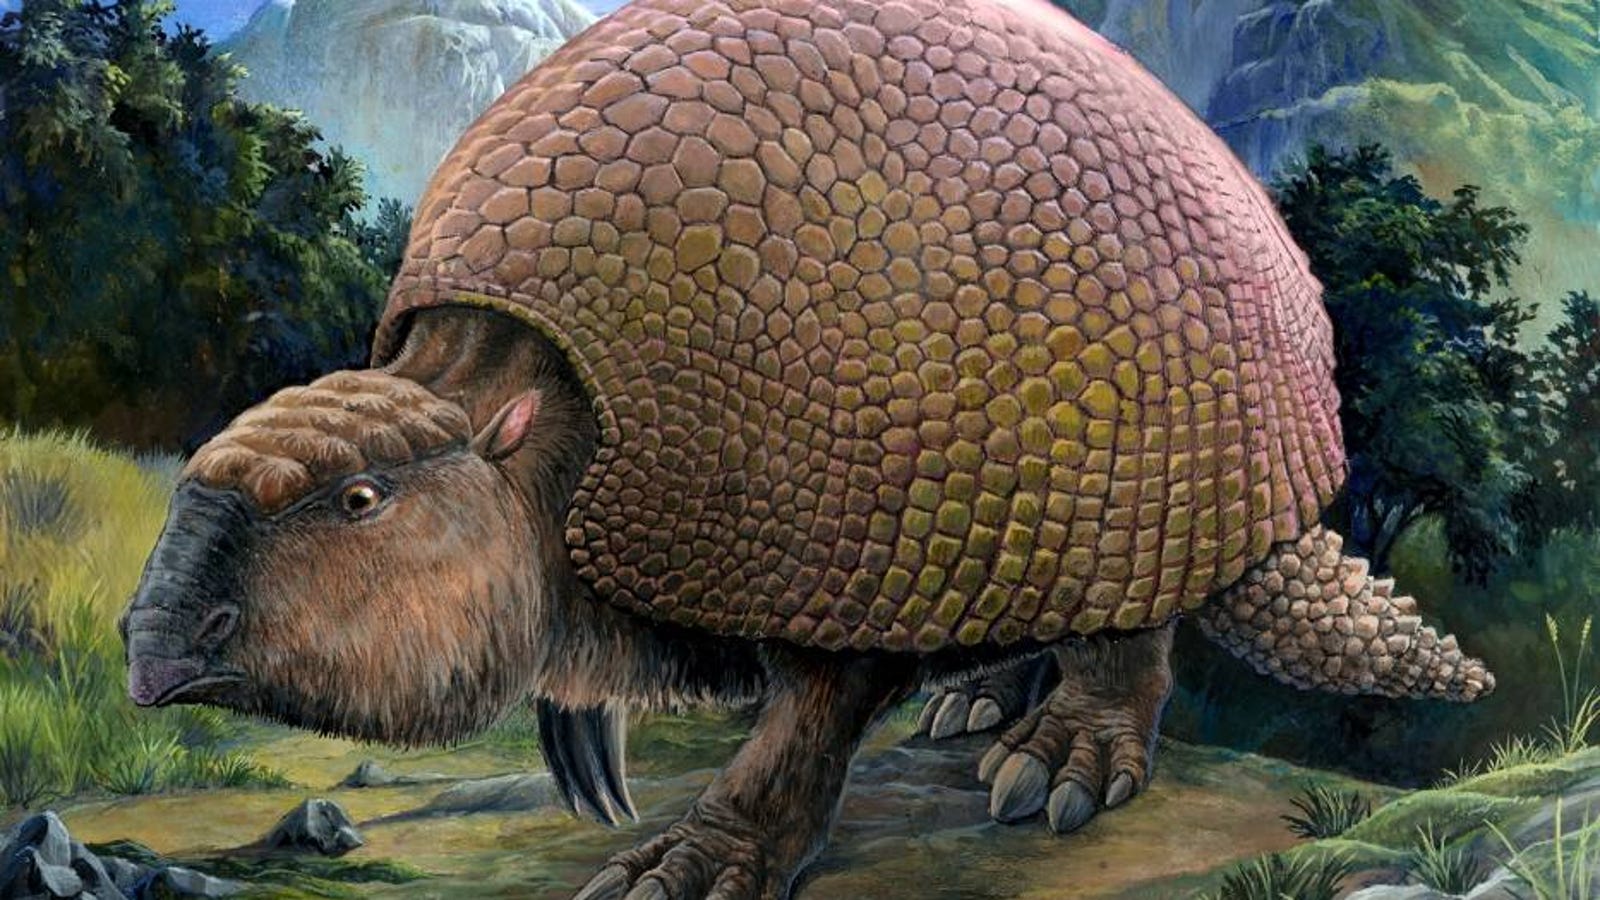  An illustration of two ancient armadillos, one with a spiky armor and one with a smooth armor, to illustrate the dimorphism between the two.